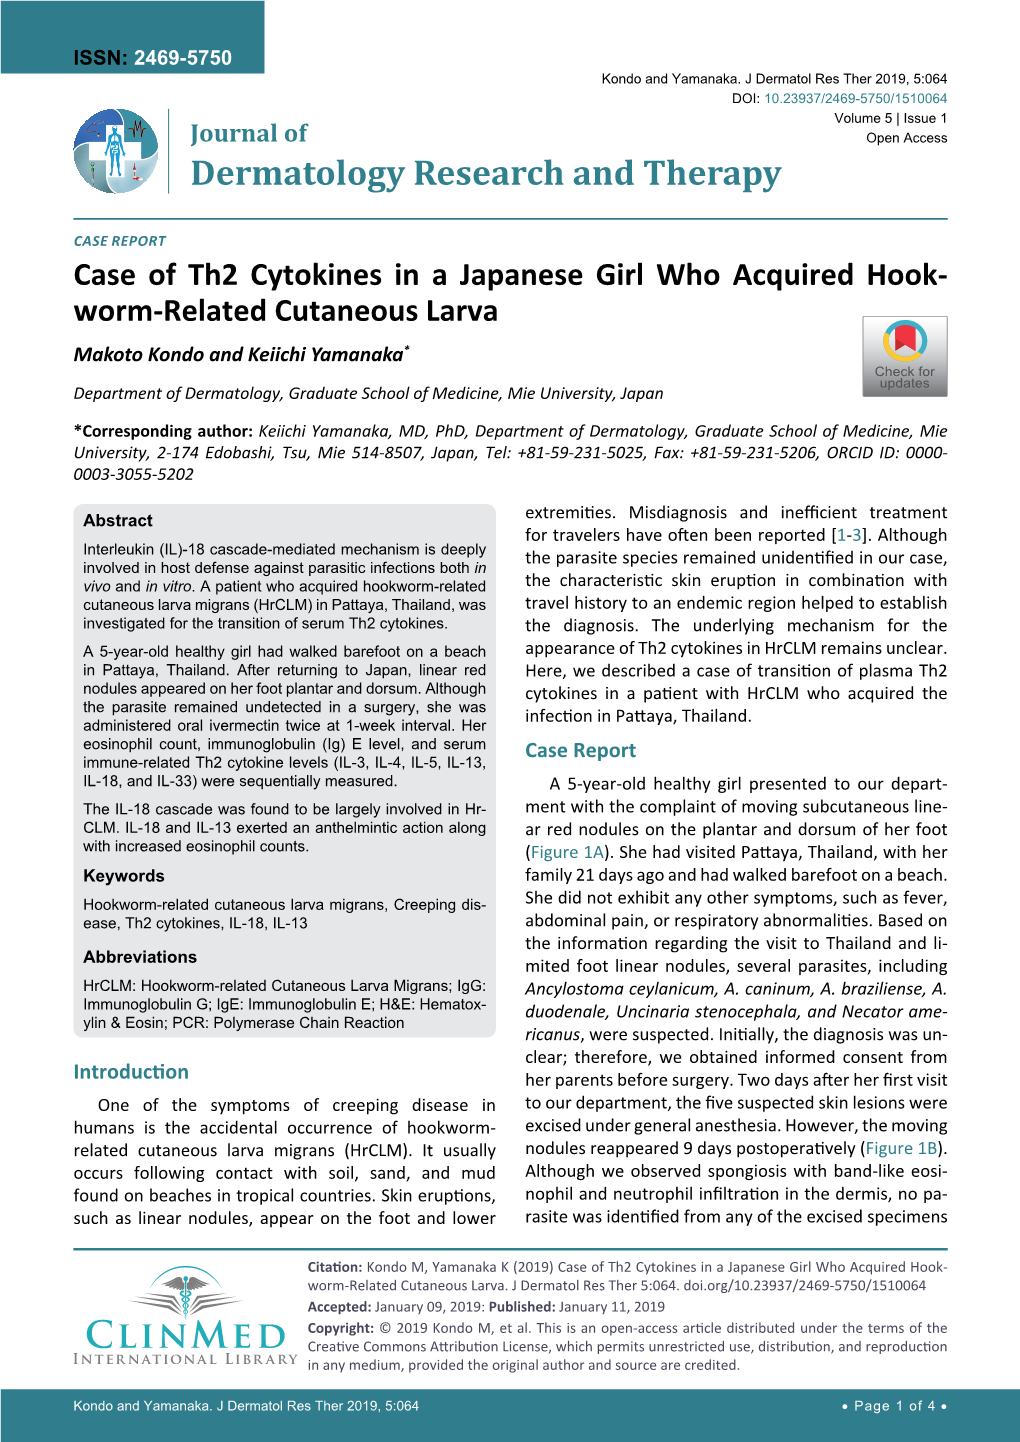 Case of Th2 Cytokines in a Japanese Girl Who Acquired Hookworm